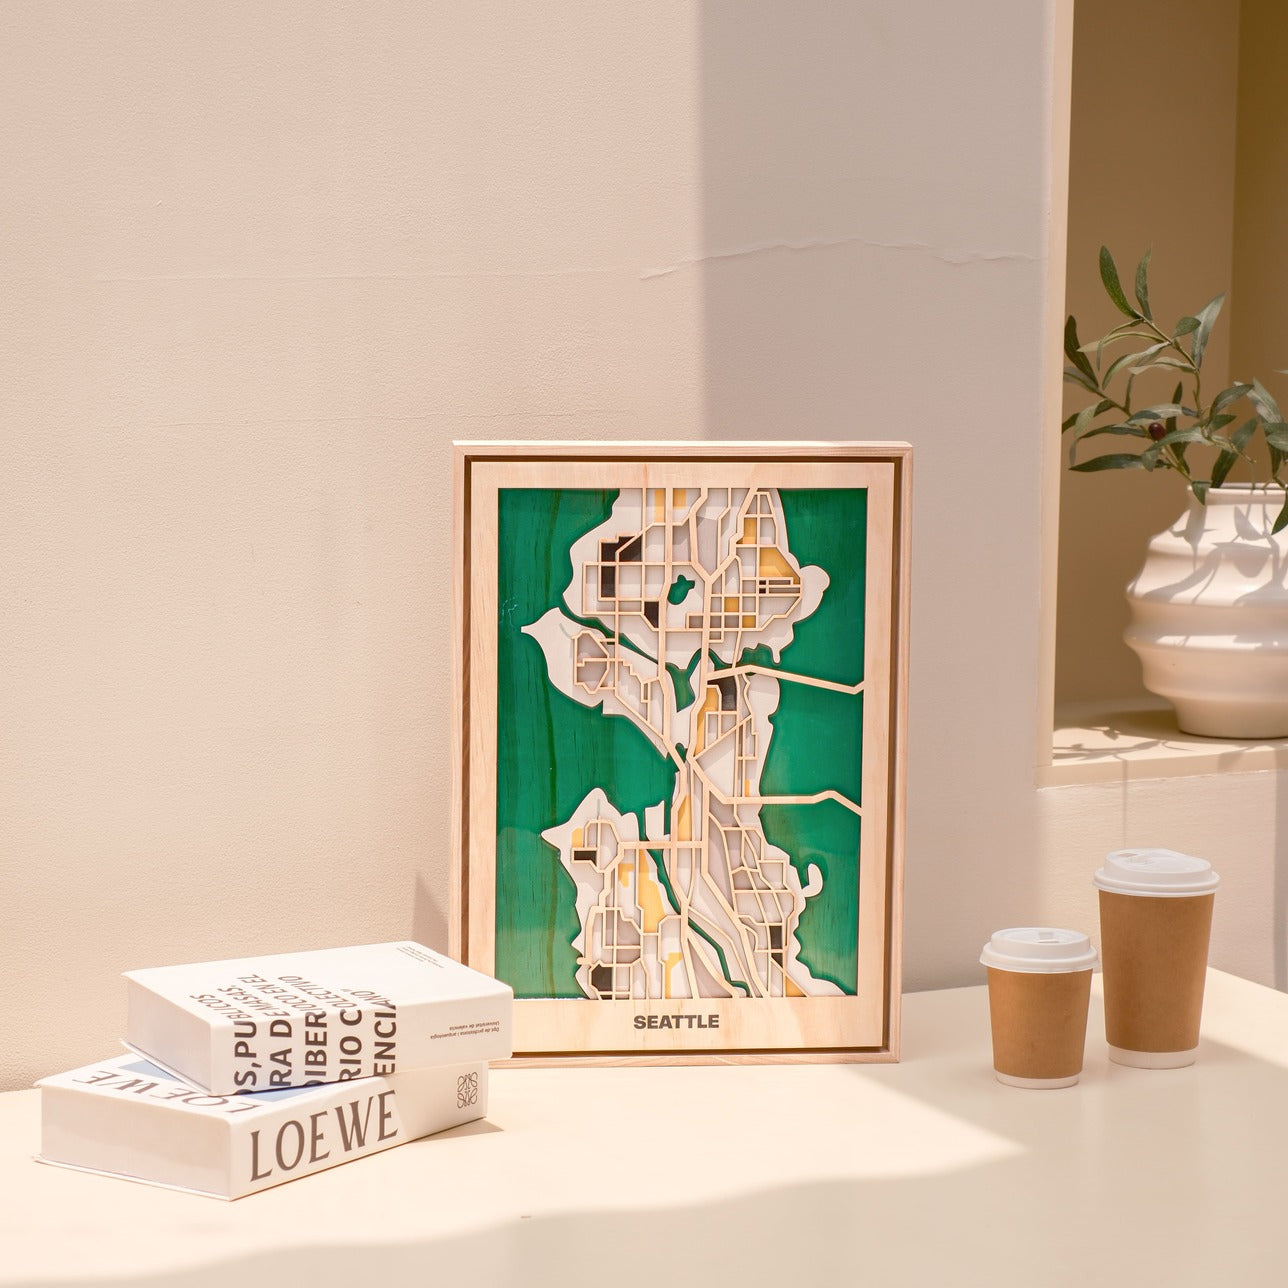 Wooden City Maps of American Cities